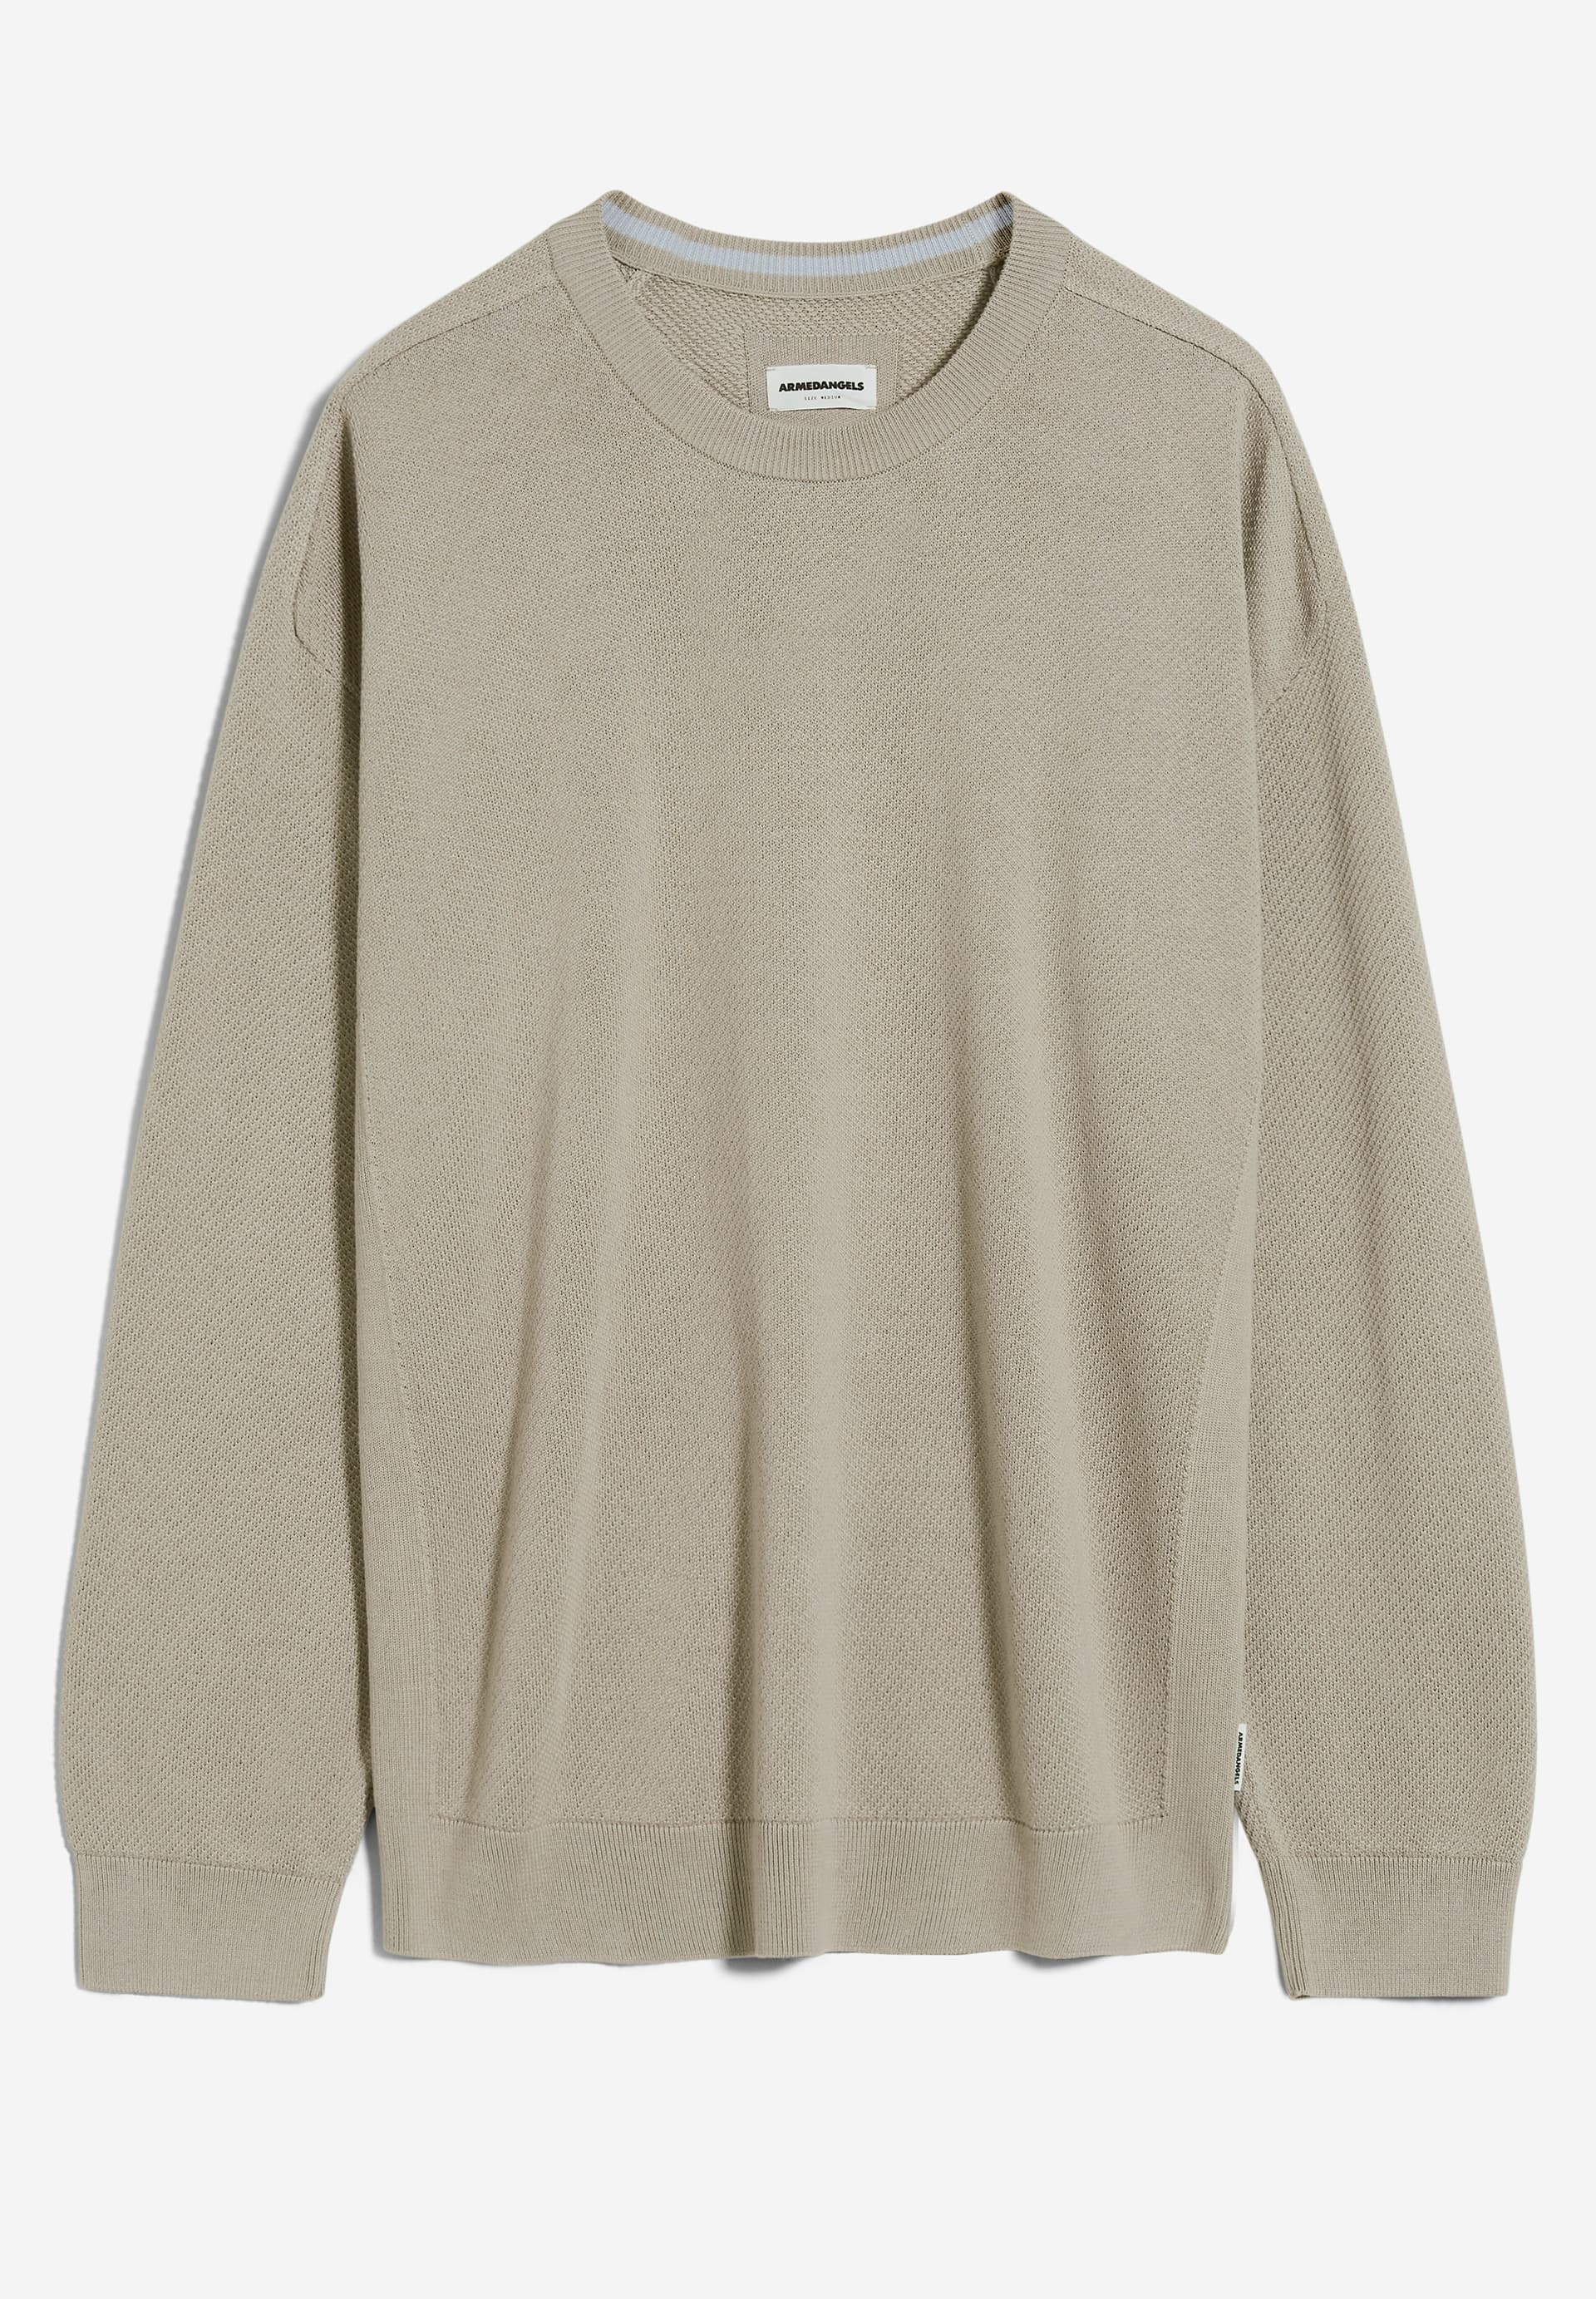 BLODAA Sweater Relaxed Fit made of TENCEL™ Lyocell Mix